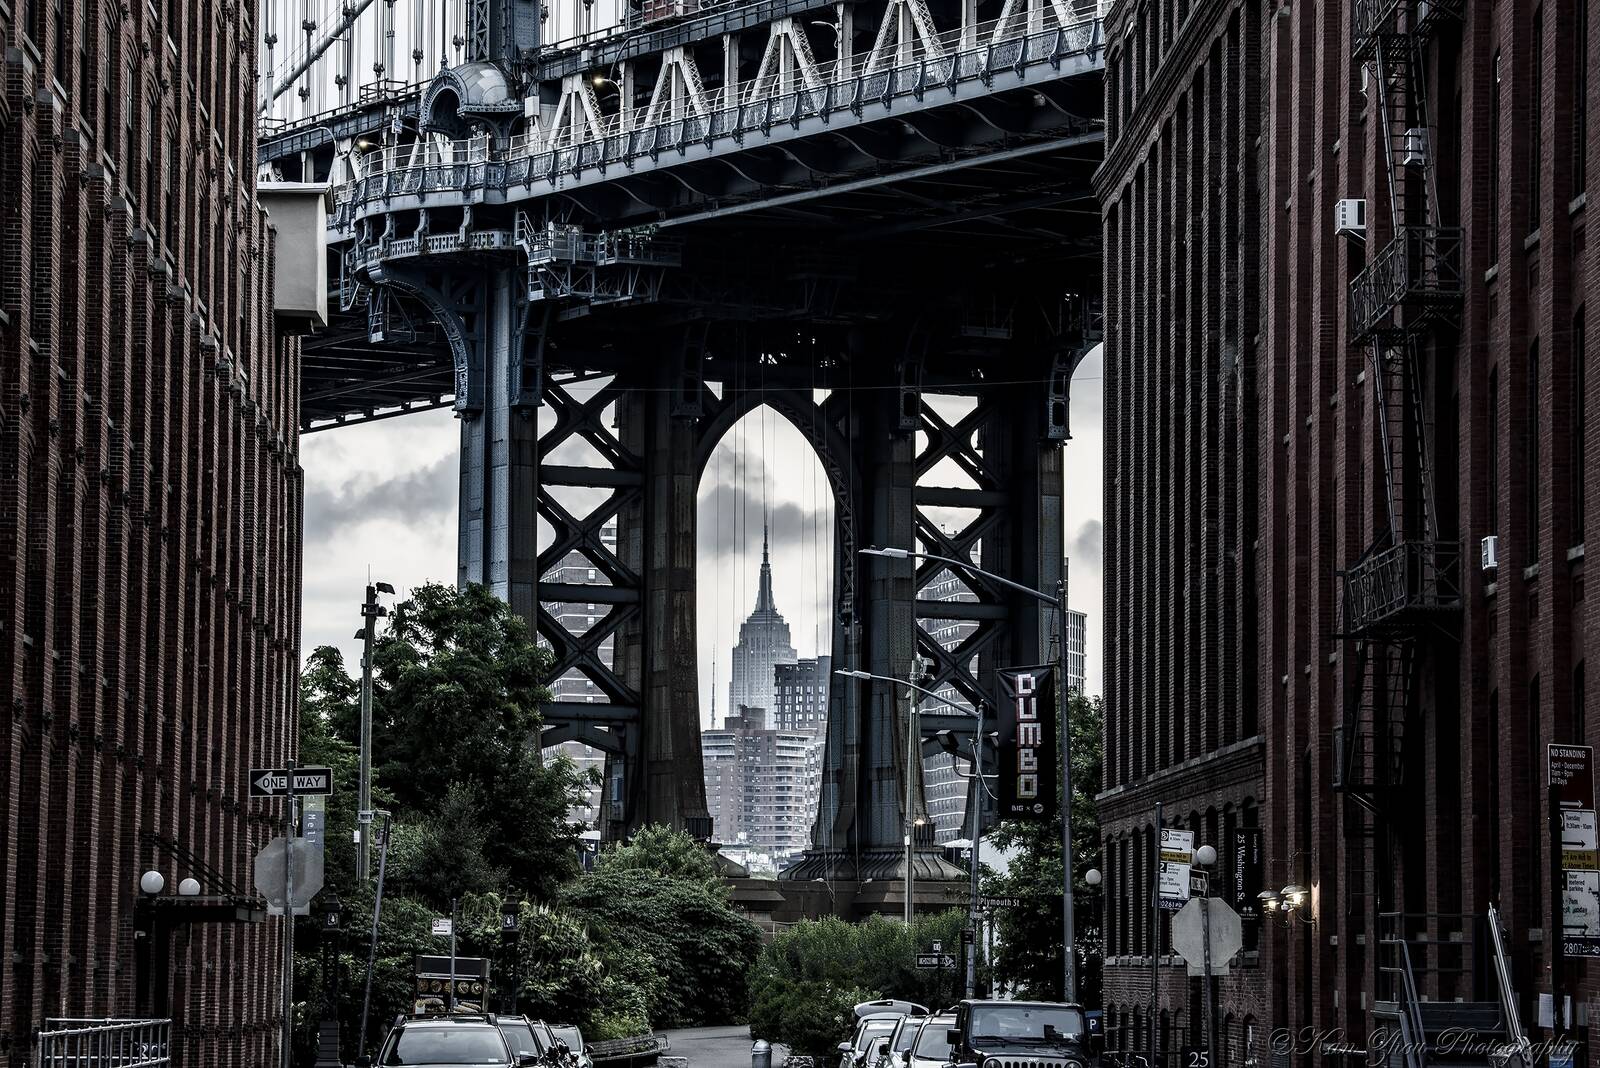 Image of Empire State Building view through the Manhattan Bridge by Kan Zhou